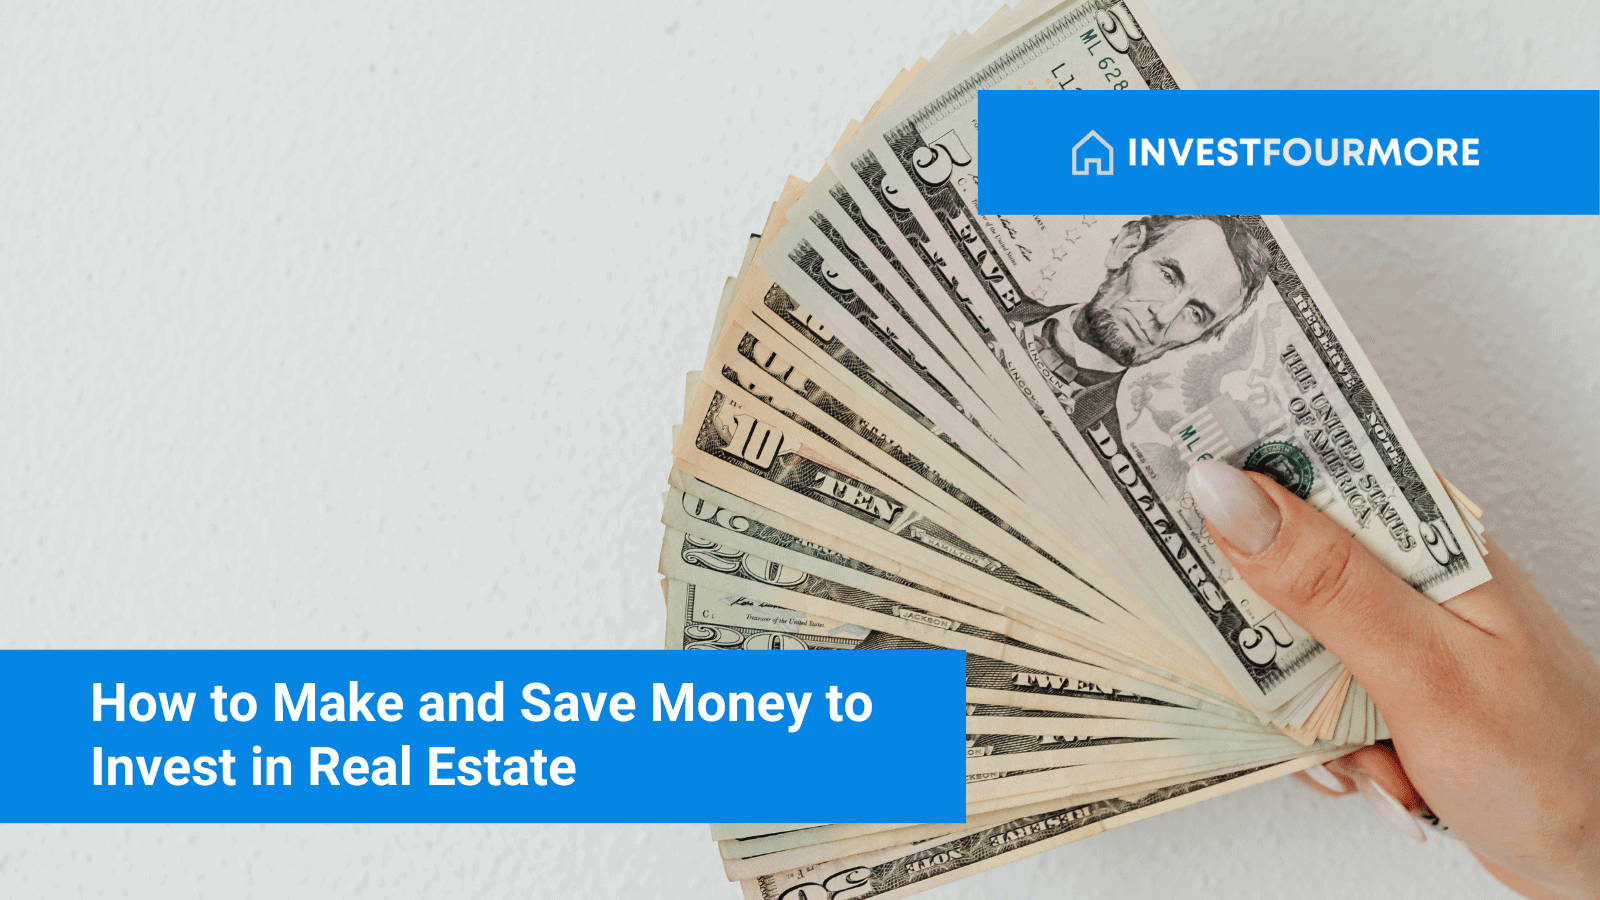 How to Make and Save Money to Invest in Real Estate